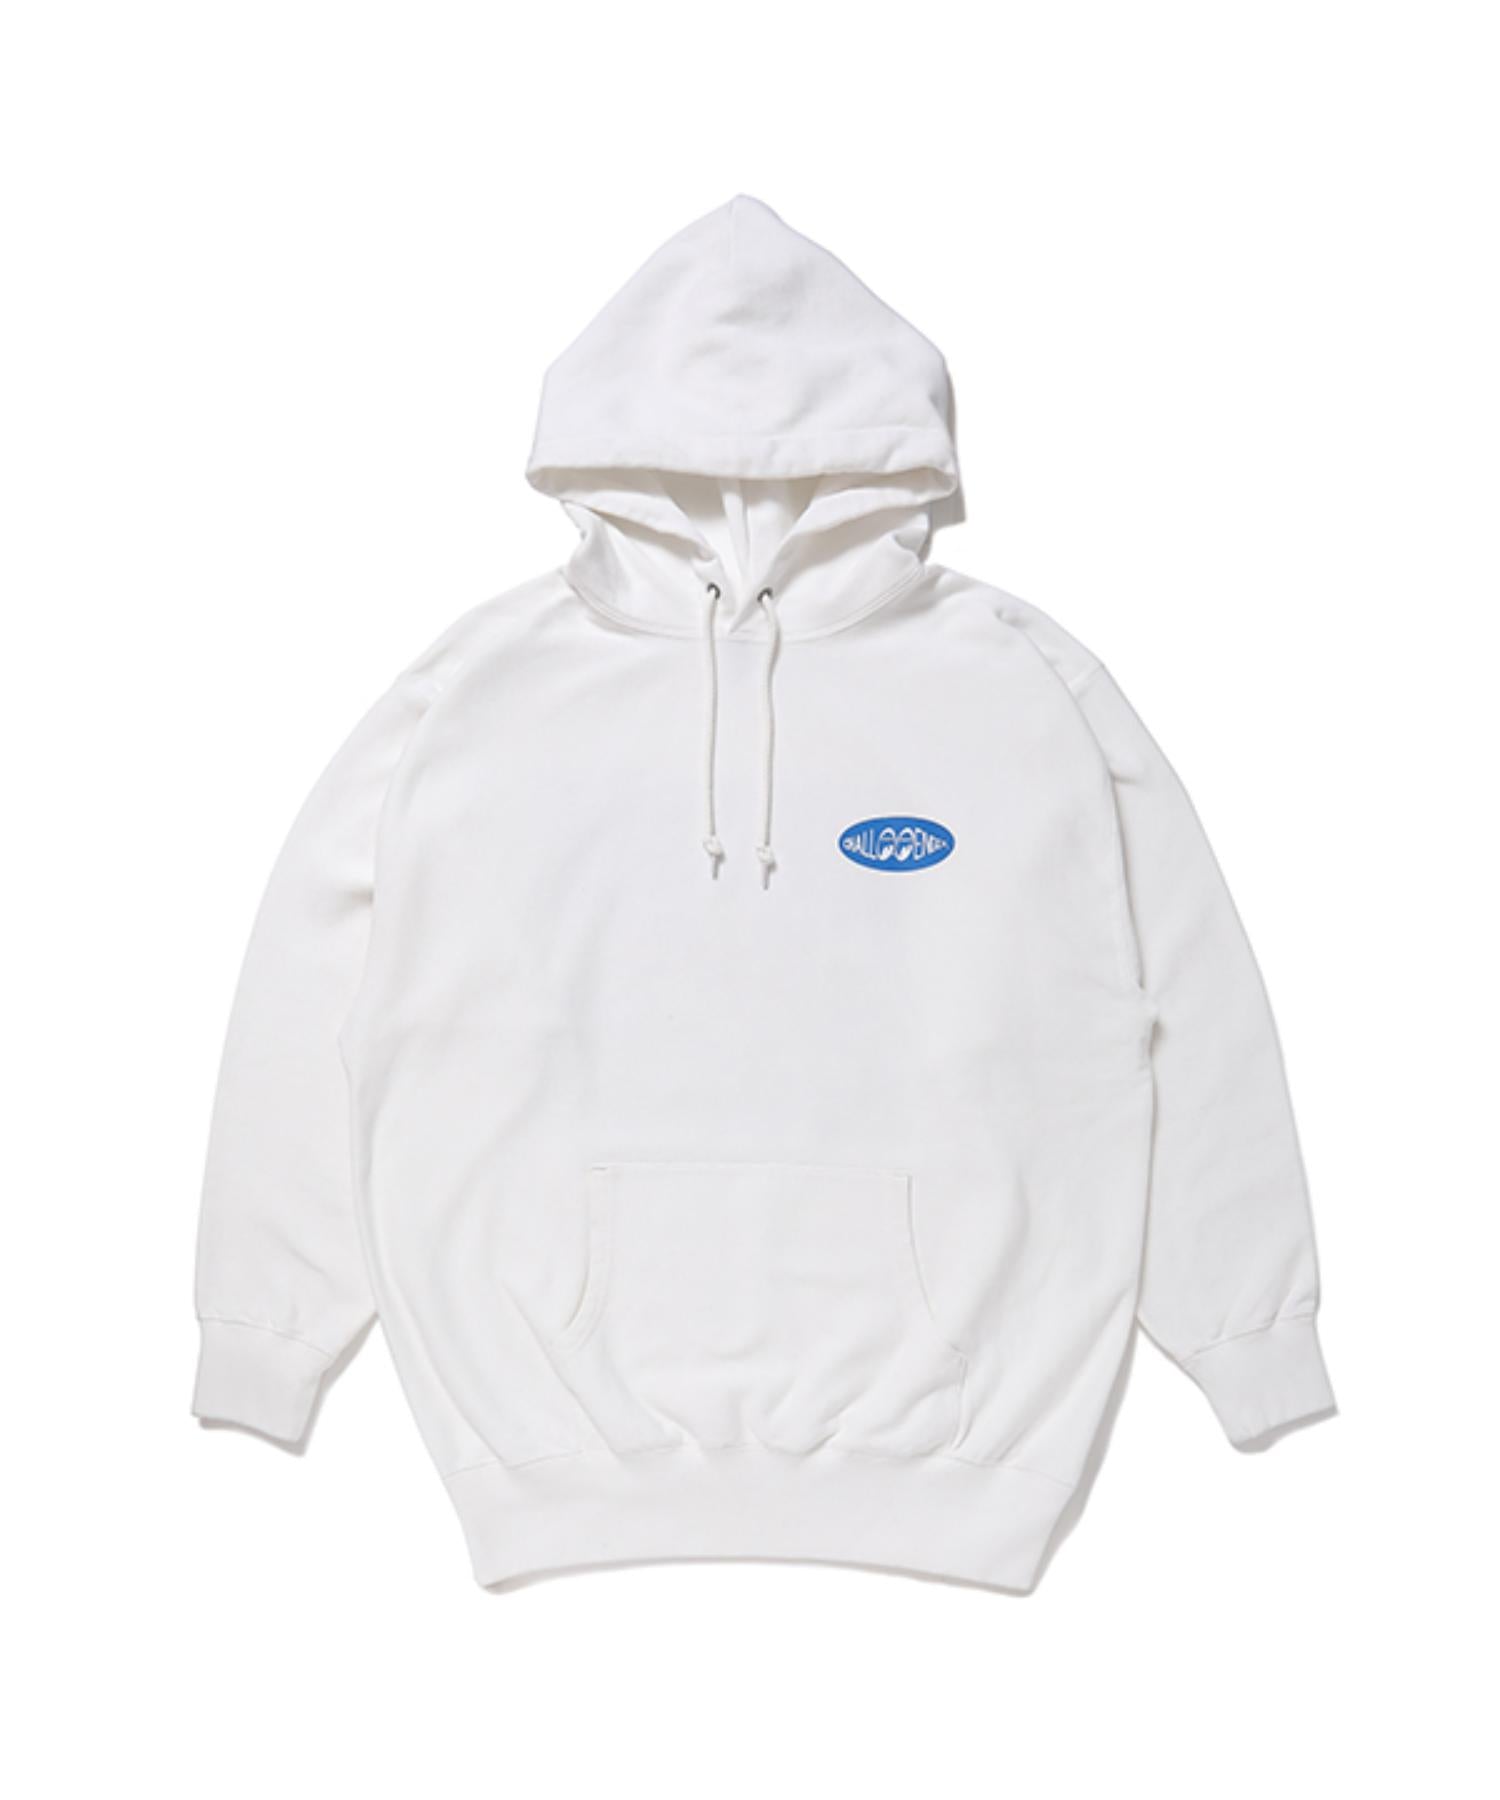 CHALLENGER x MOON Equipped HOODIE - CHALLENGER